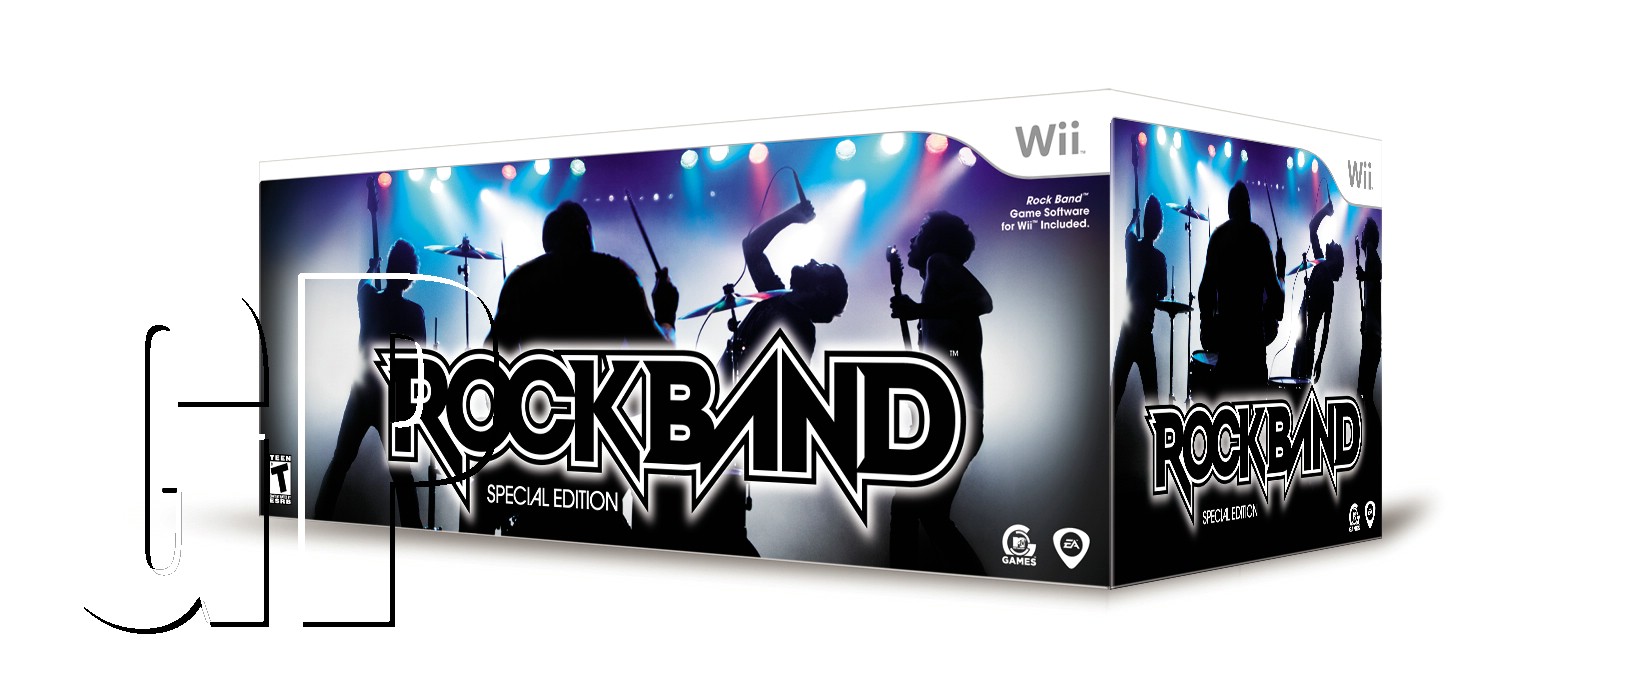 Rock Band Wii Screens- Drums, Boxart